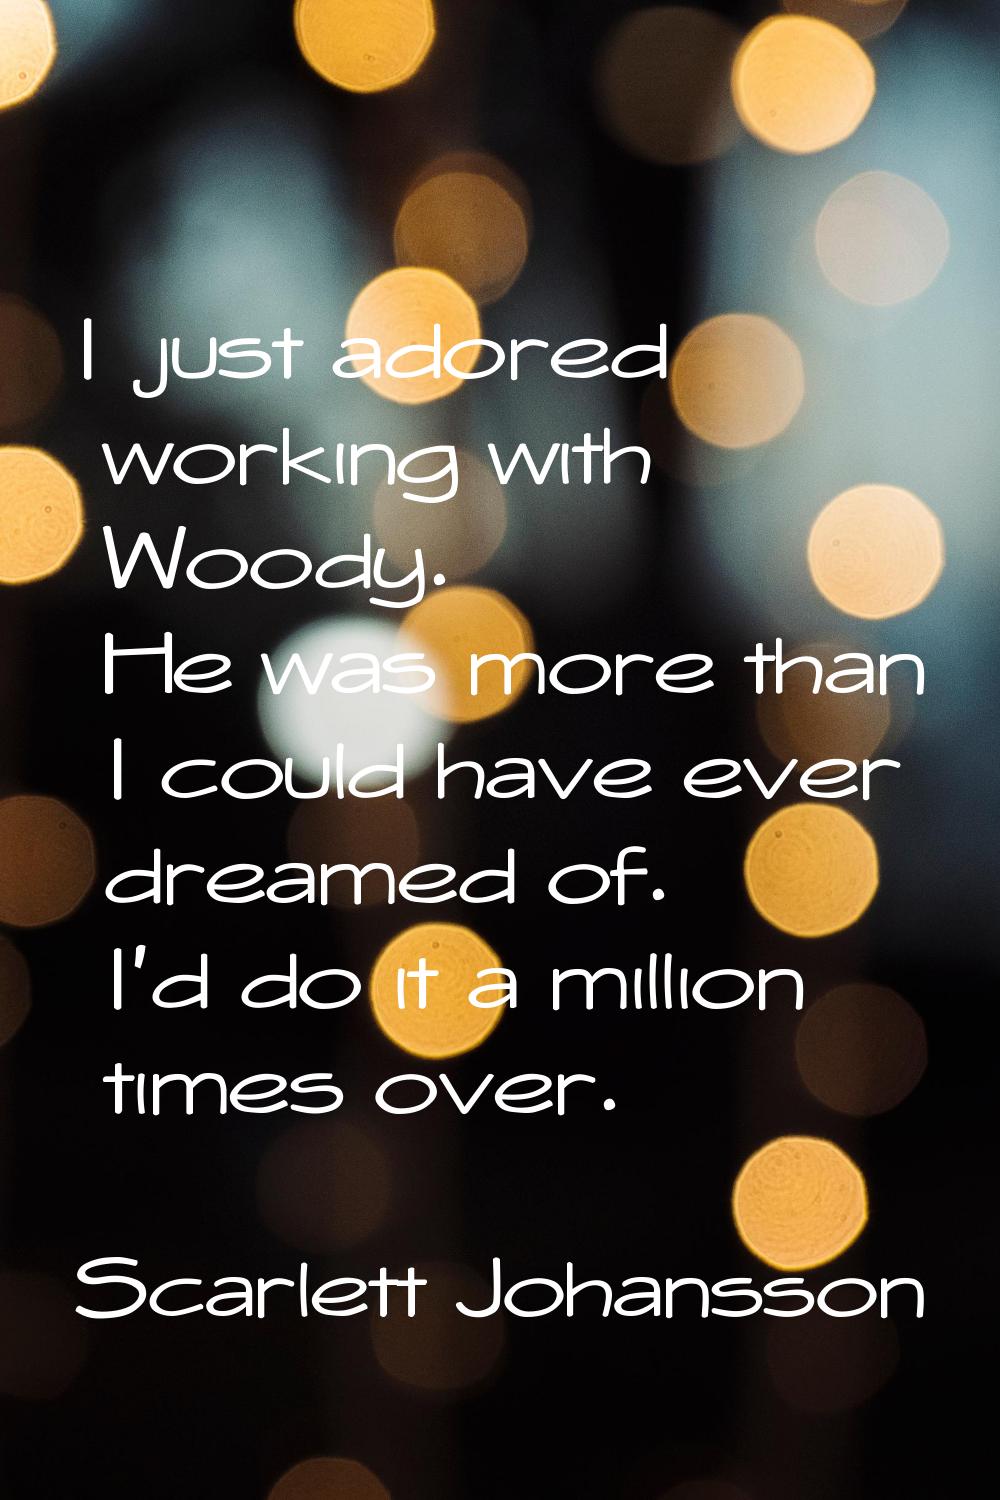 I just adored working with Woody. He was more than I could have ever dreamed of. I'd do it a millio